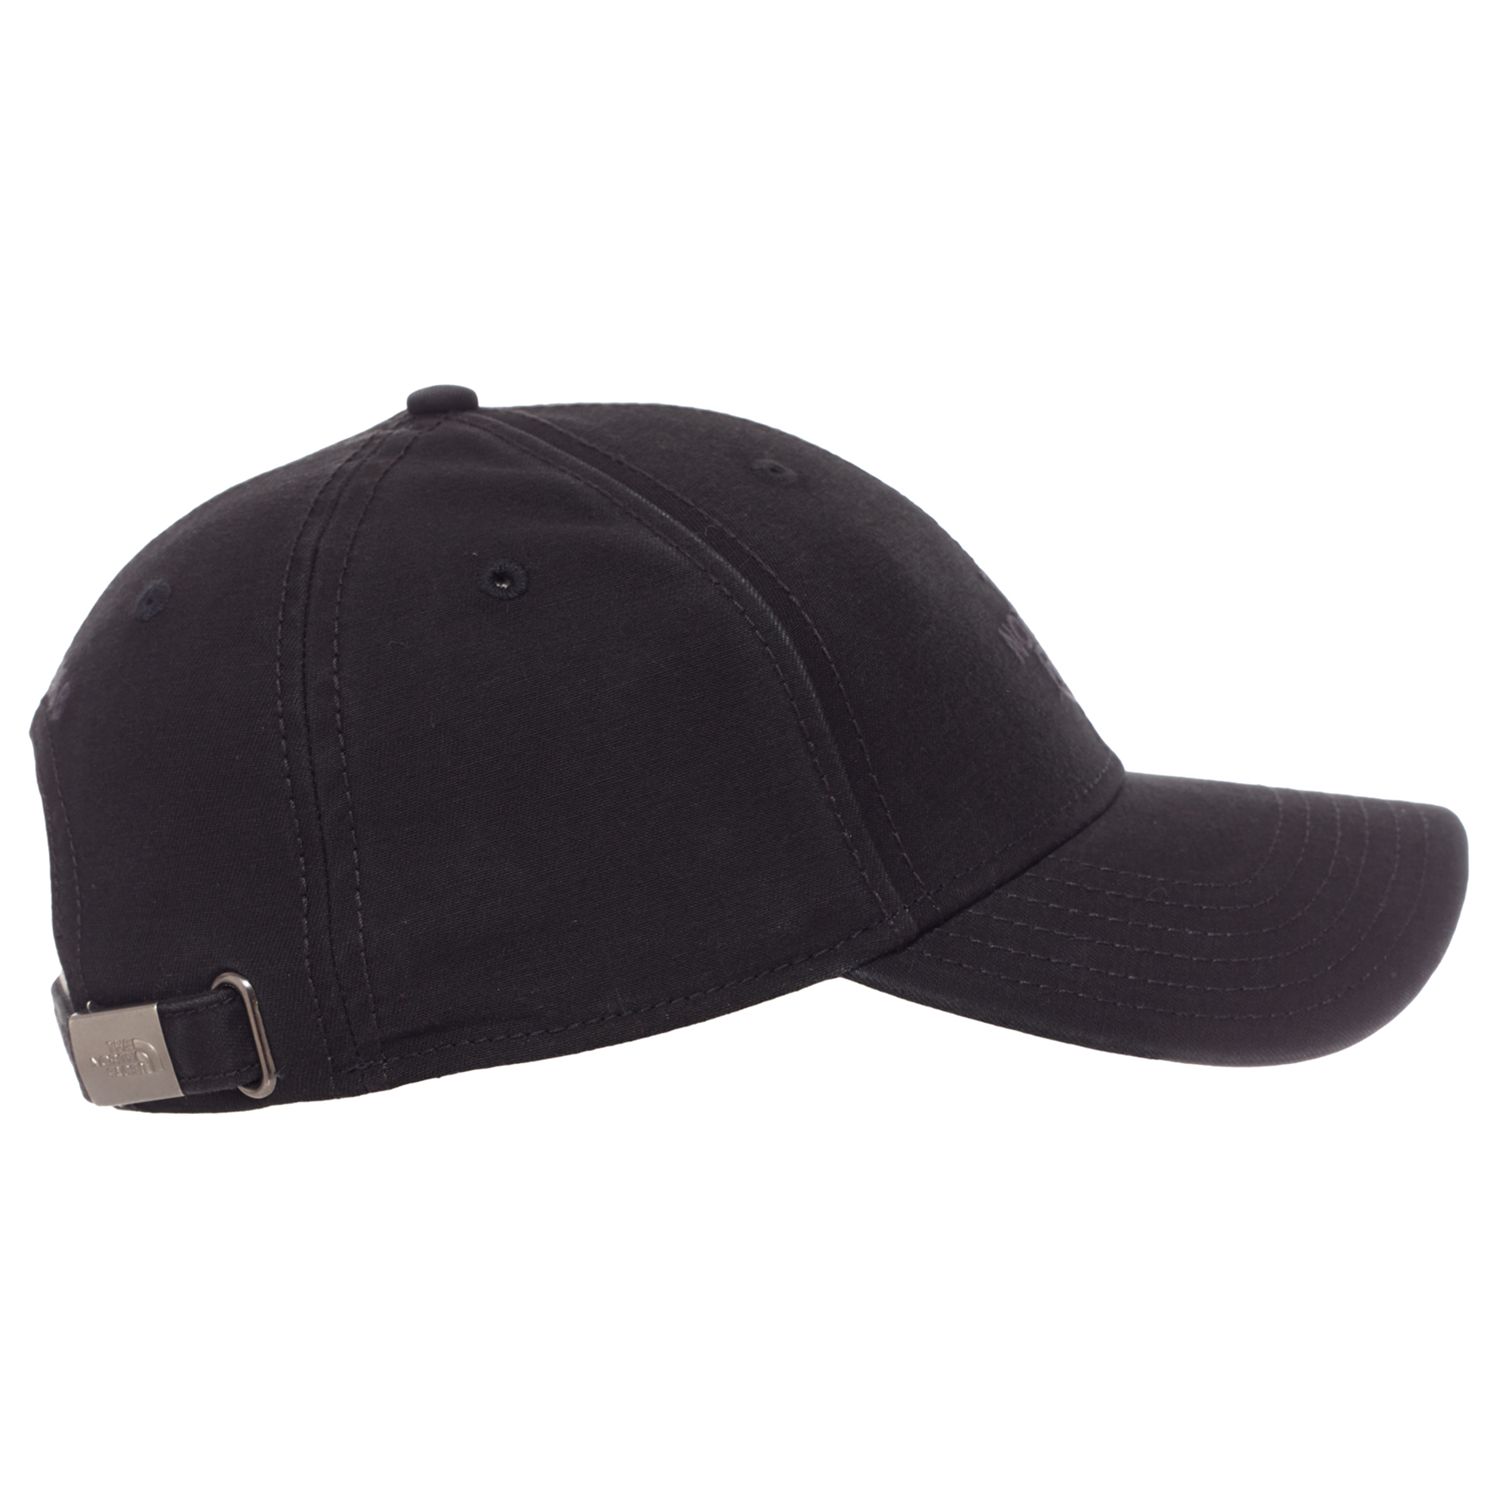 The North Face 66 Classic Cap, One Size, Black